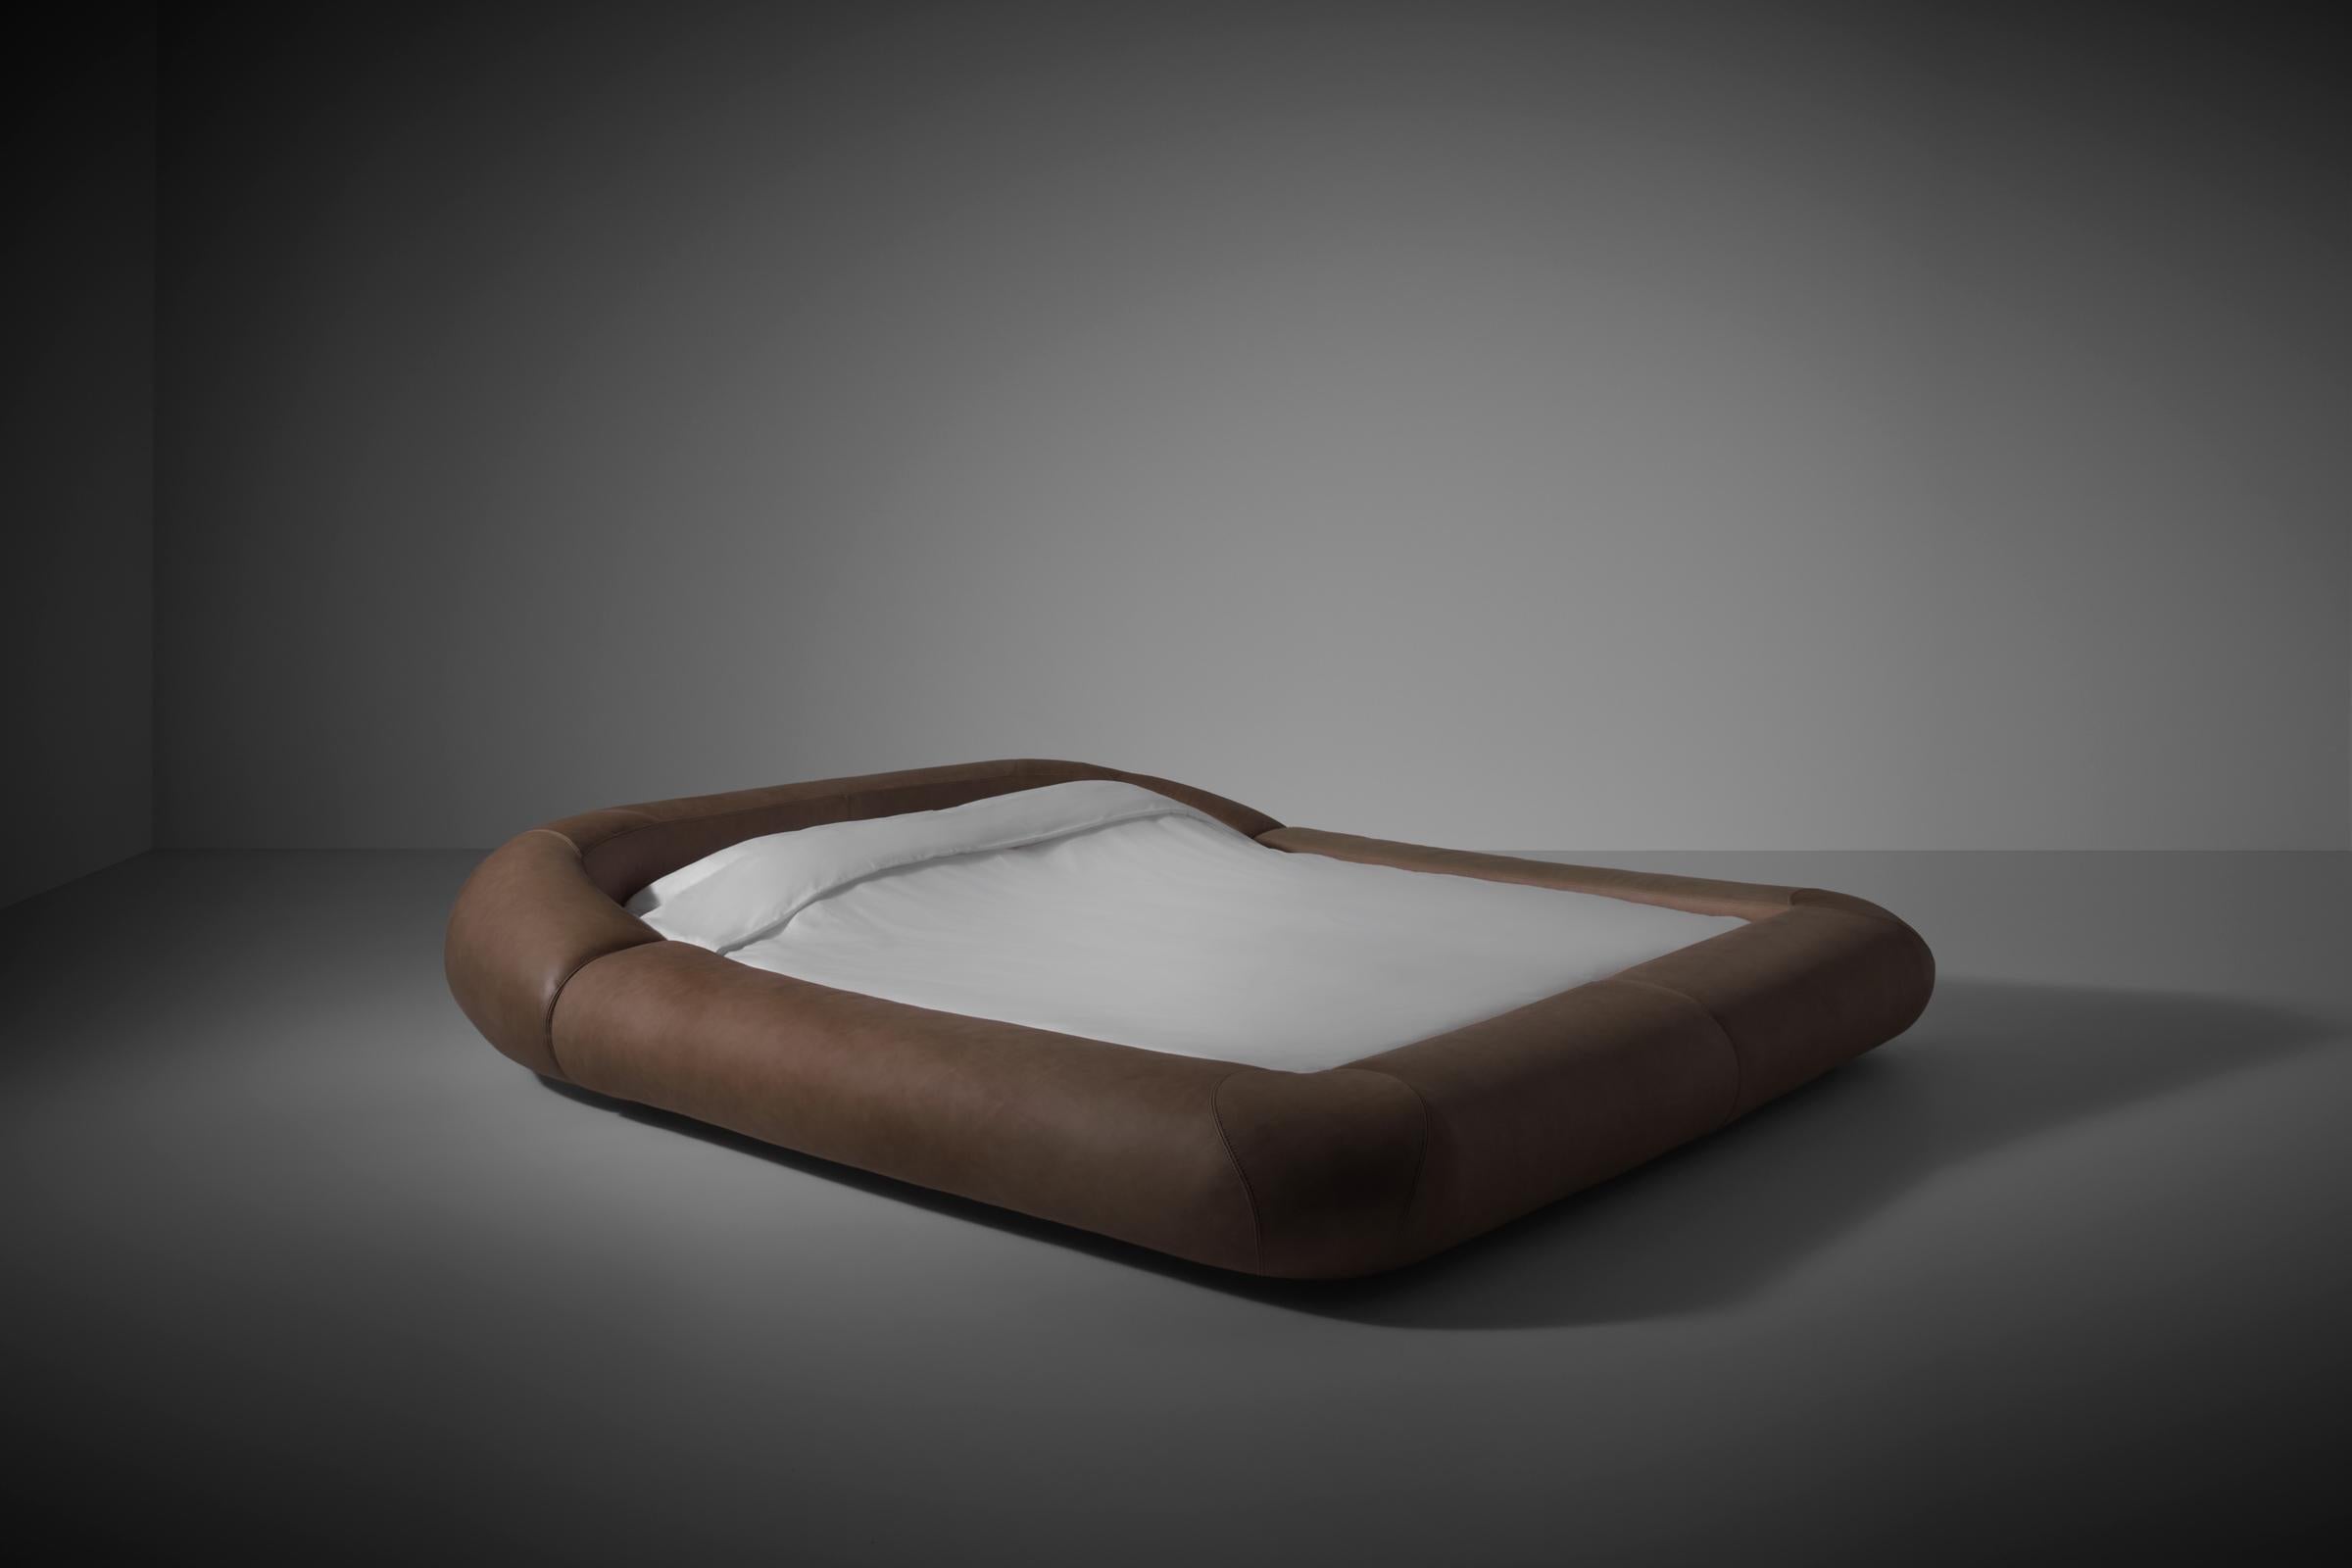 Large king size bed by Gae Aulenti mod. ‘Tennis’ for Gavina, Italy 1972. Unique and iconic bed from the ‘Tennis‘ series referring to the round shapes and the typical stitching pattern used for tennis balls. The bed has beautiful bulky curves which